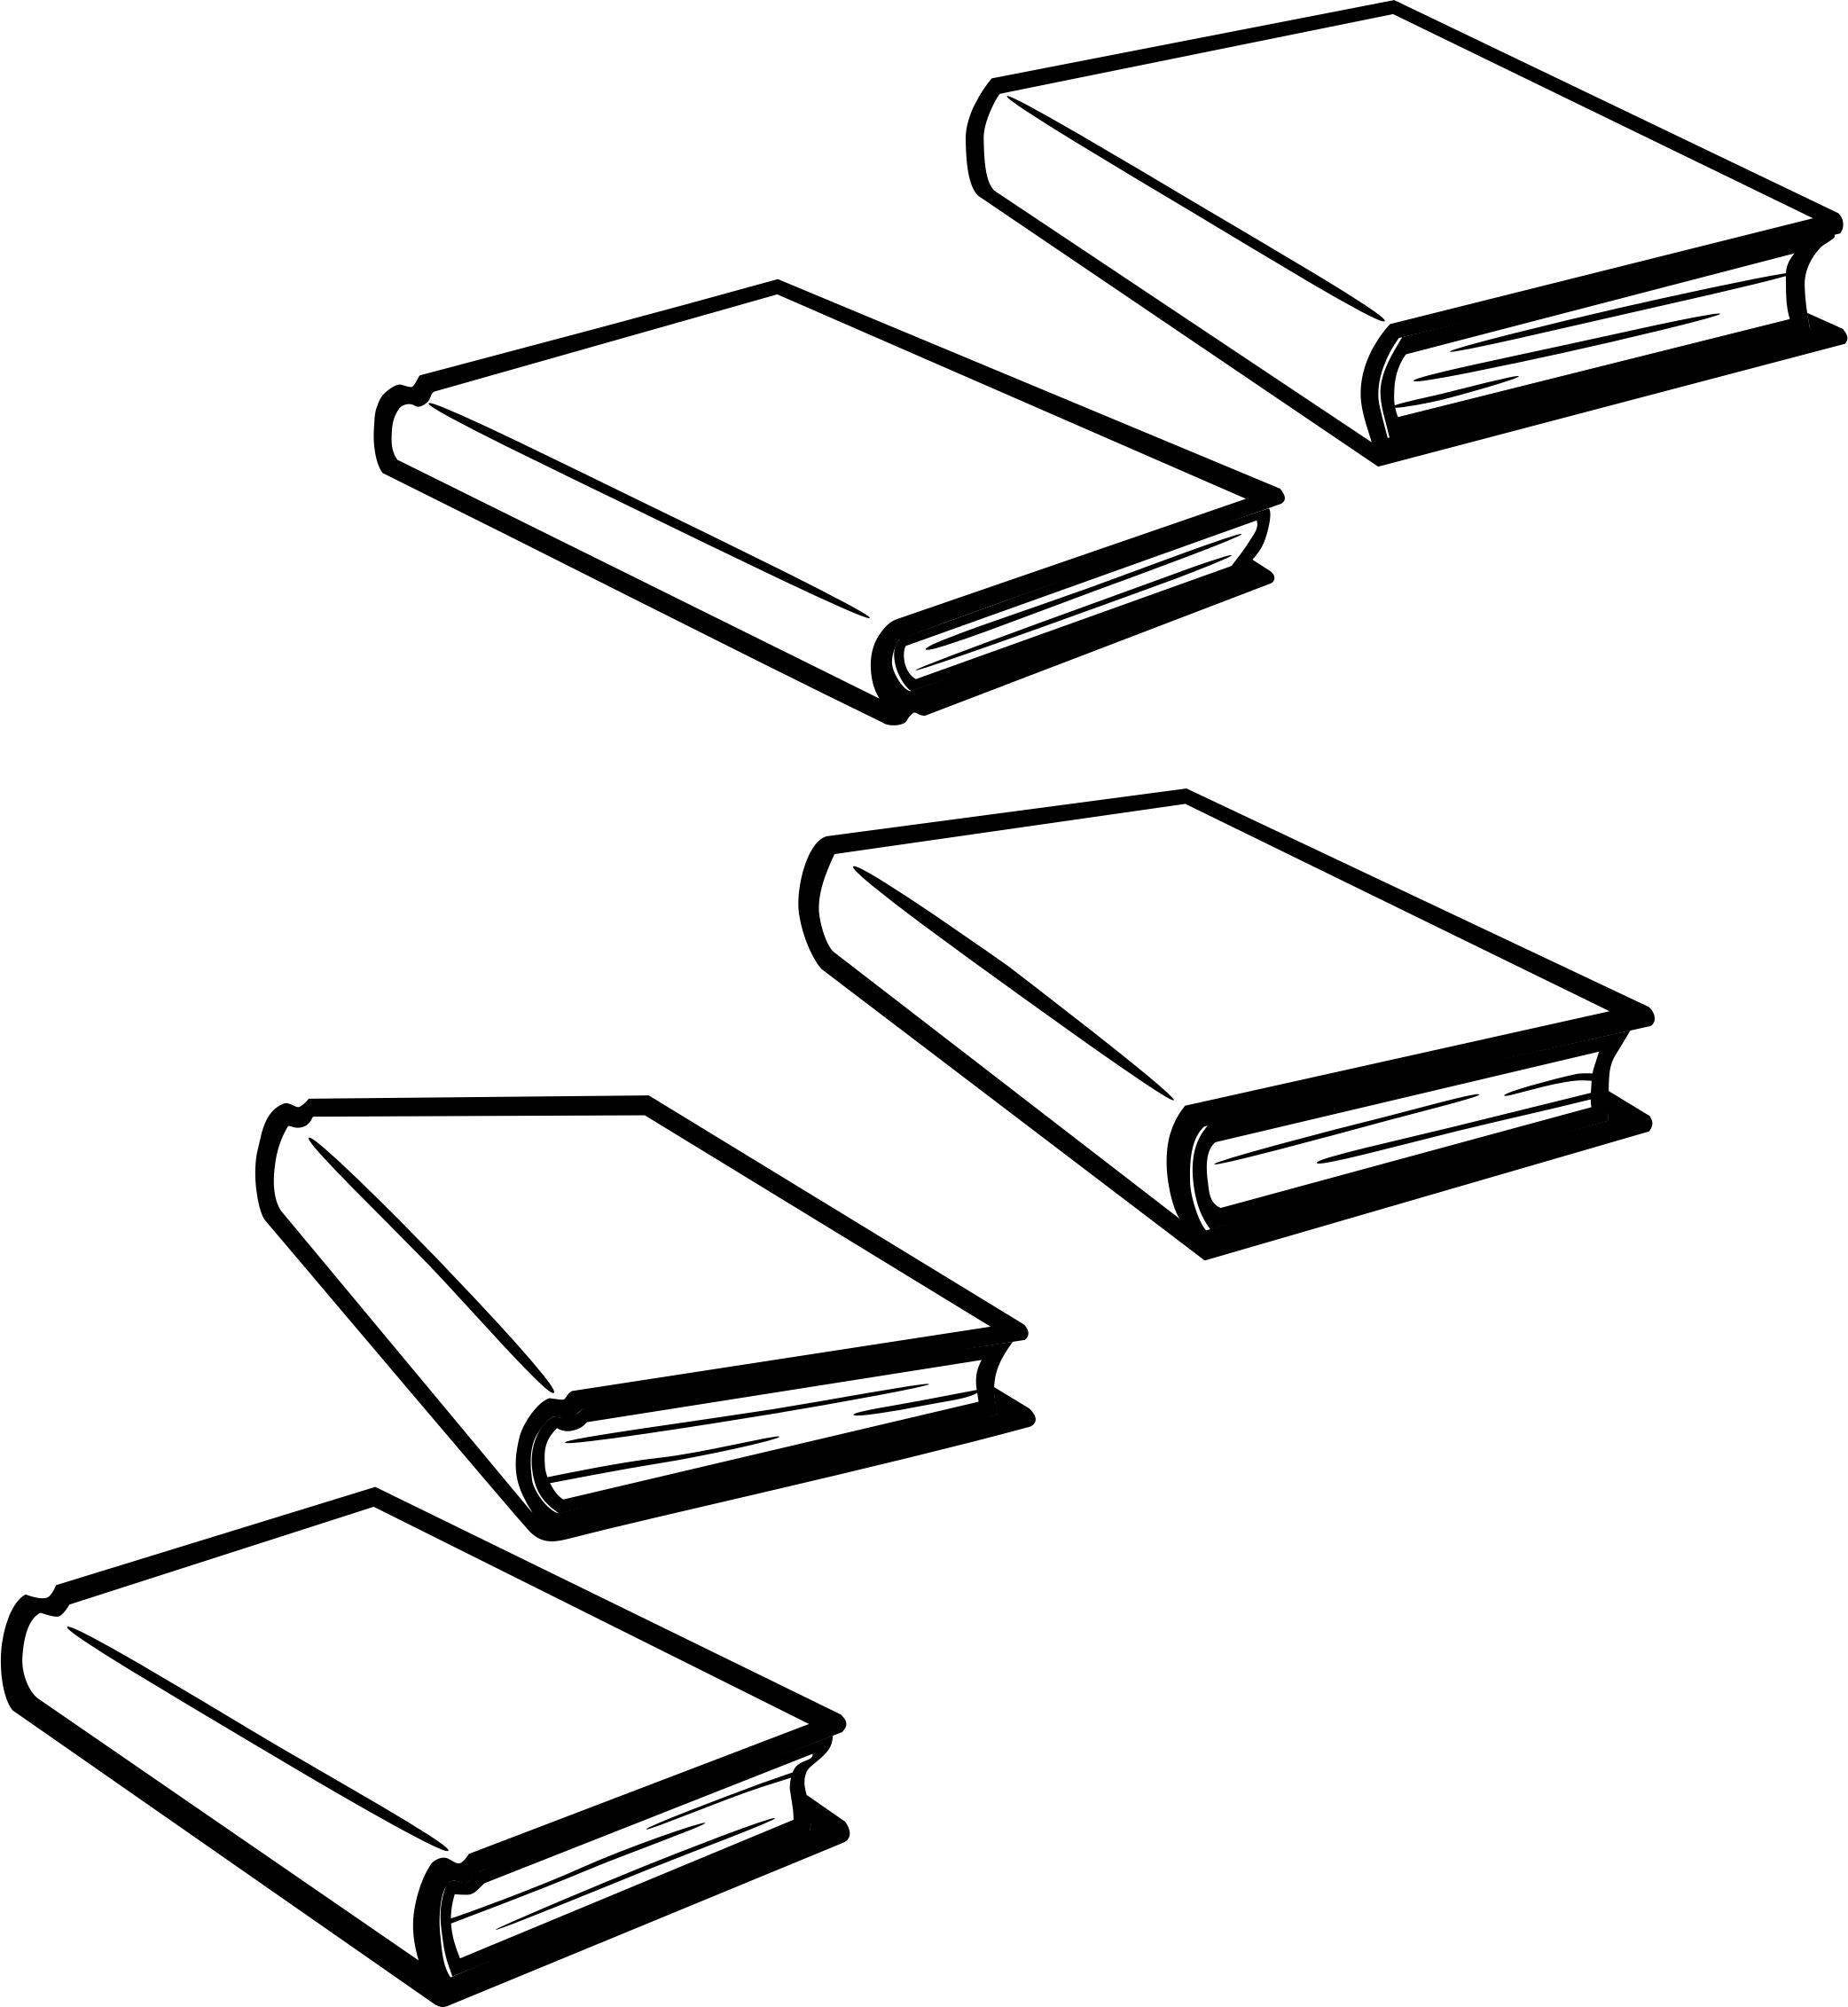 Books - Lineart - Separated png